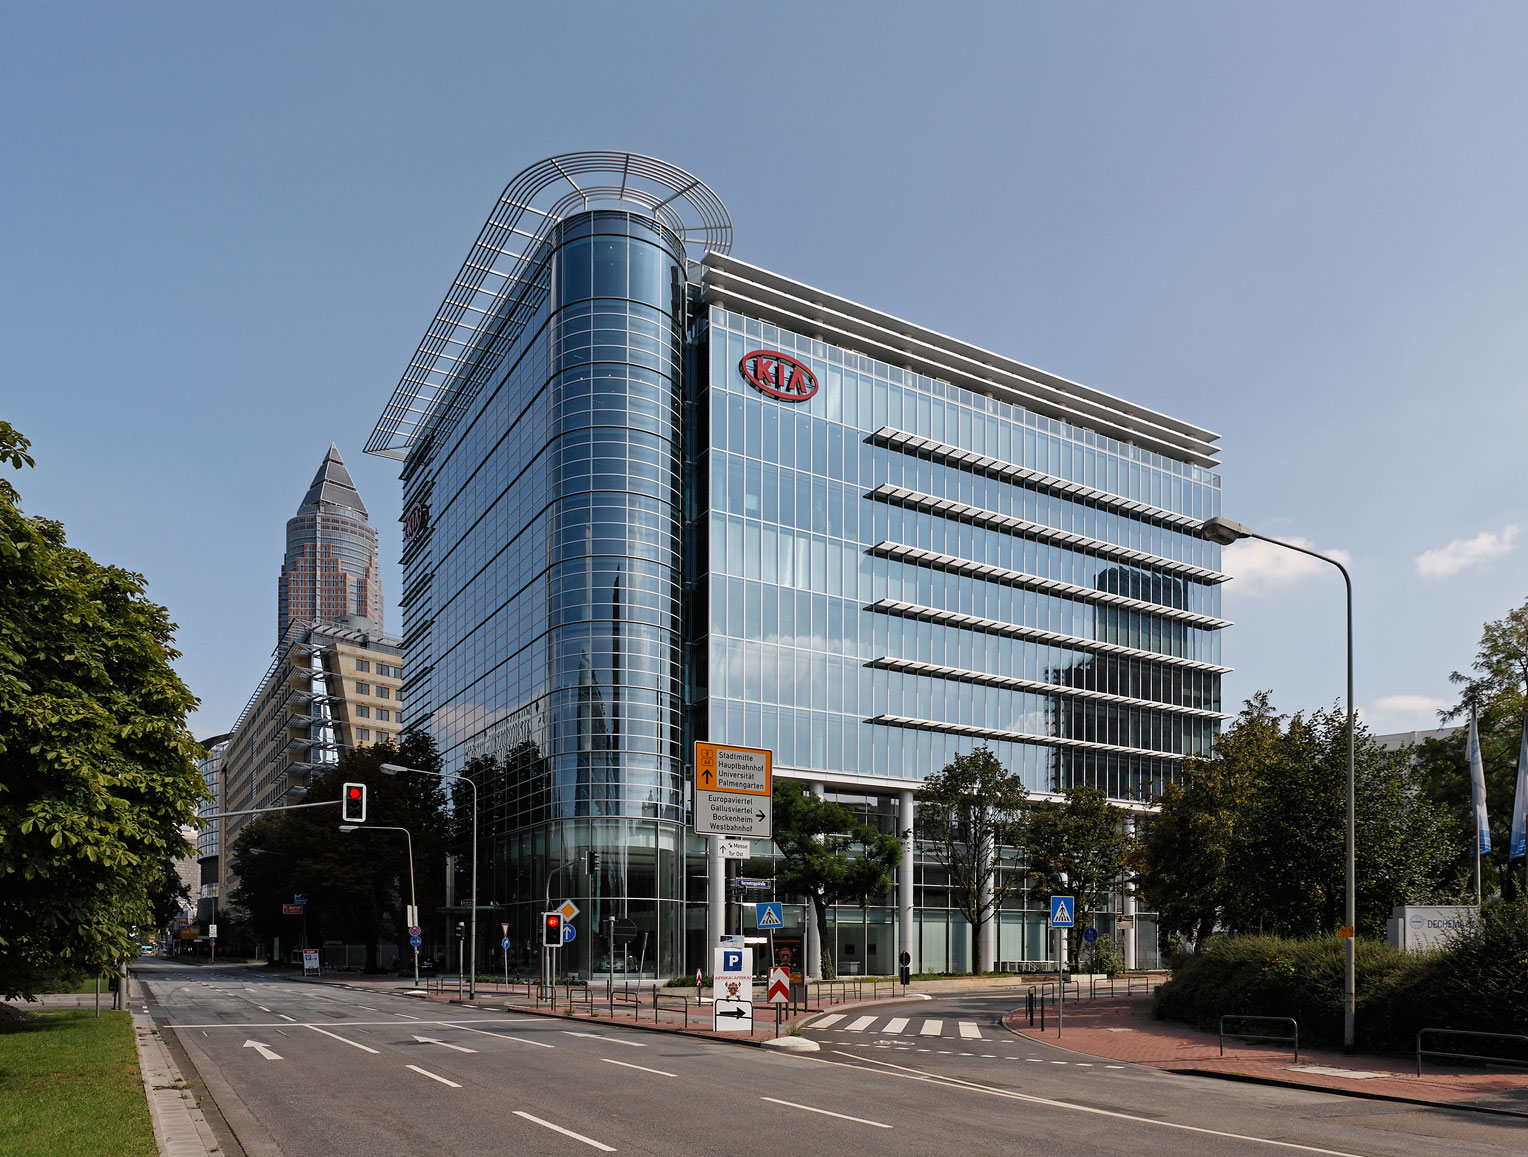 Side exterior view of KIA Motors building with glass frontage